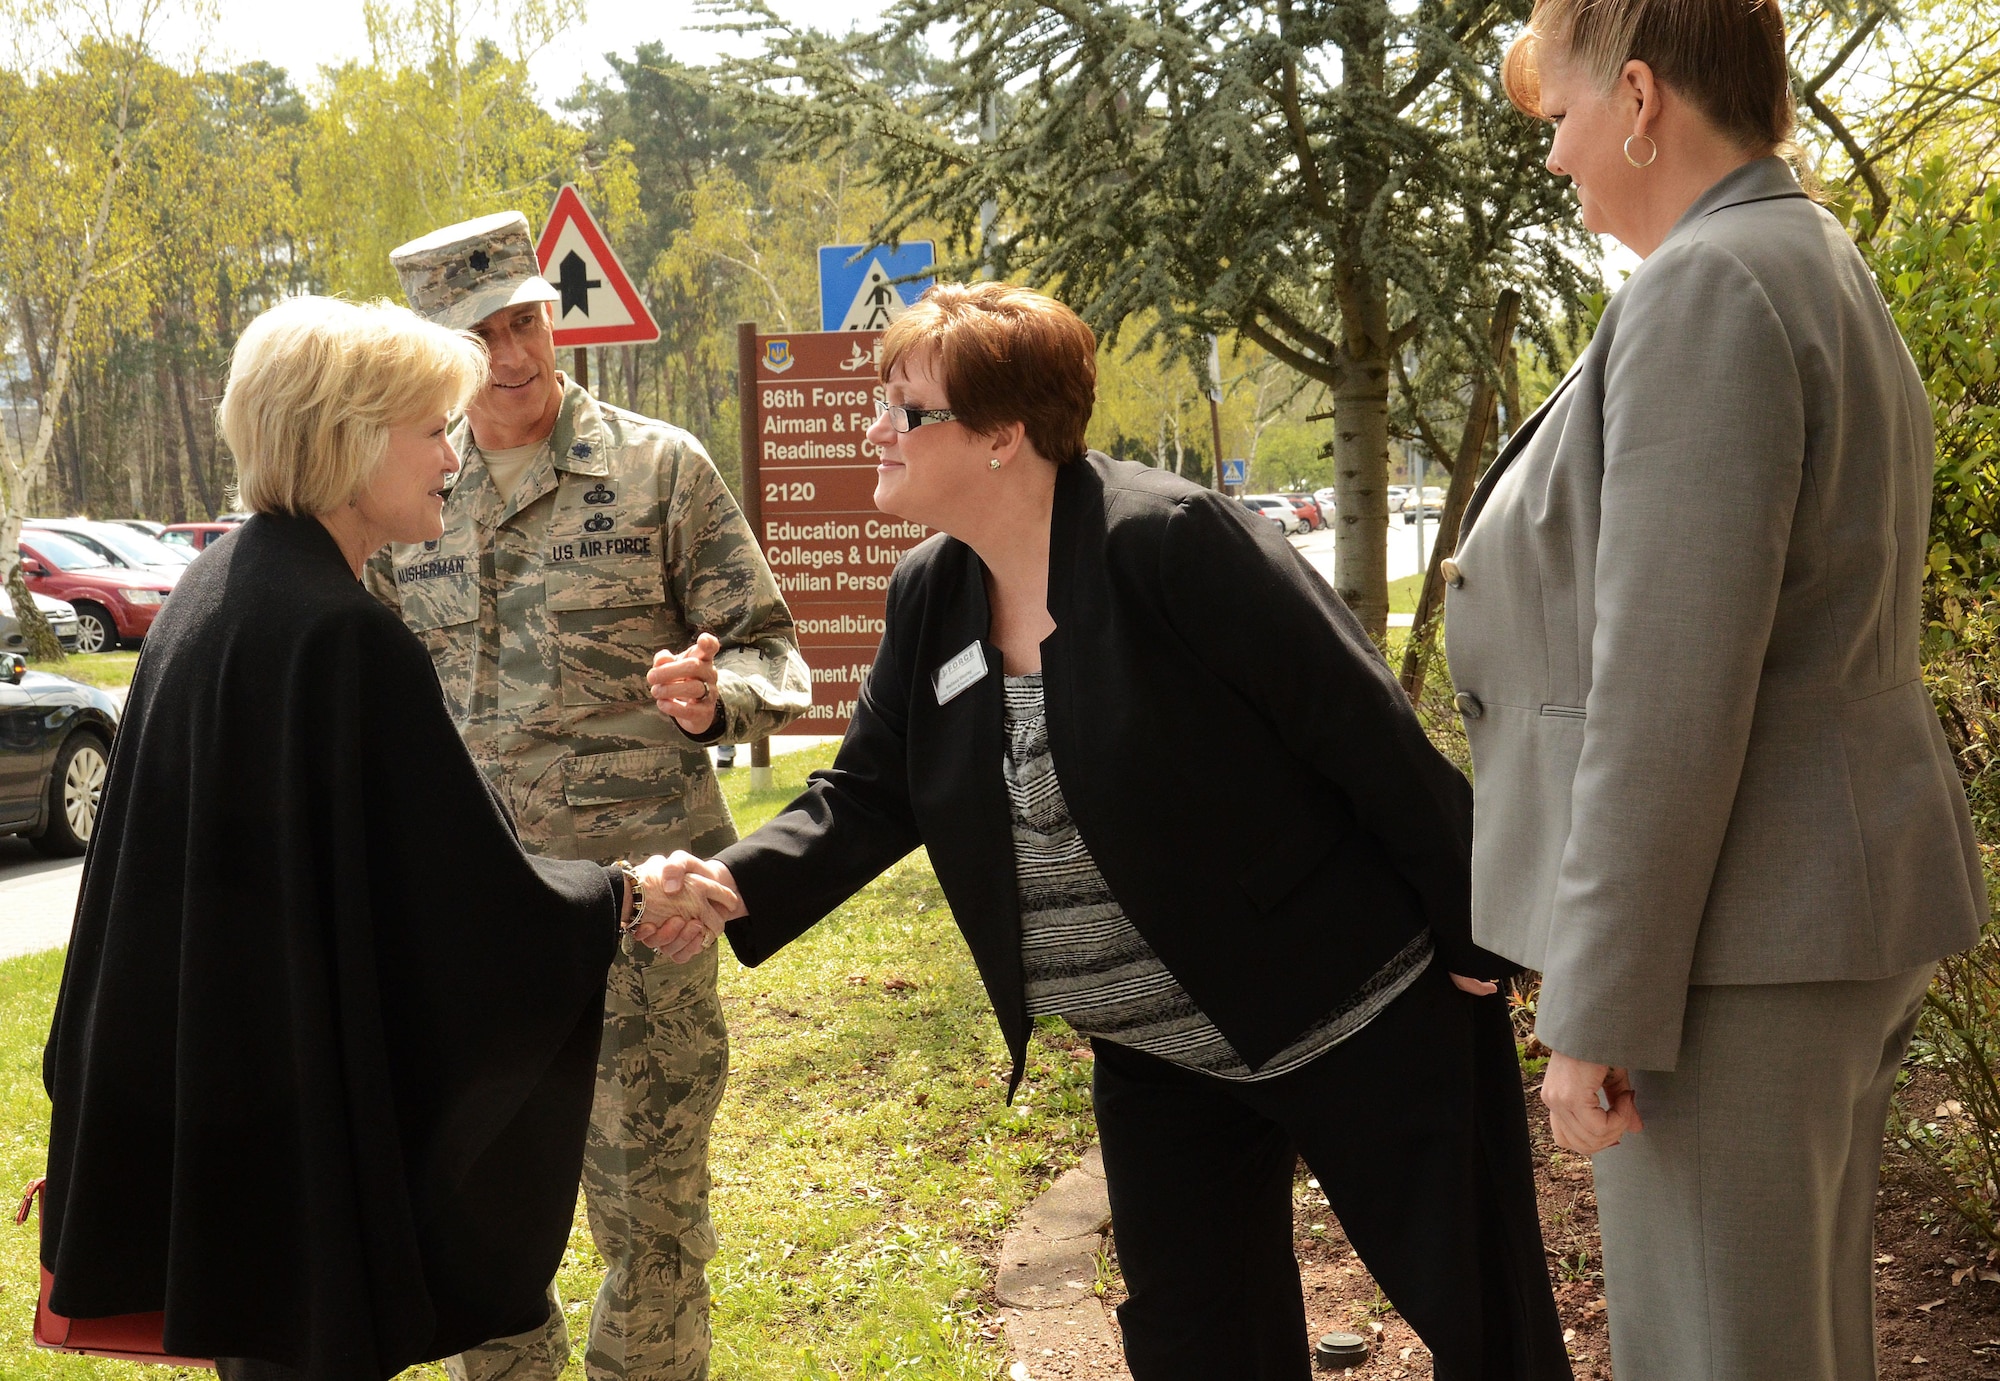 Dawn Goldfein, wife of Air Force Vice Chief of Staff Gen. David L. Goldfein, is greeted by Lt. Col. Thomas Ausherman, the 86th Force Support Squadron commander, and members from the Ramstein Airman and Family Readiness Center at Ramstein Air Base, Germany, April 18, 2016. Dawn had the opportunity to meet with other spouses on base and several dependents who were part of the ordered departure from Turkey in late March. (U.S. Air Force photo/Master Sgt. Amanda Callahan)